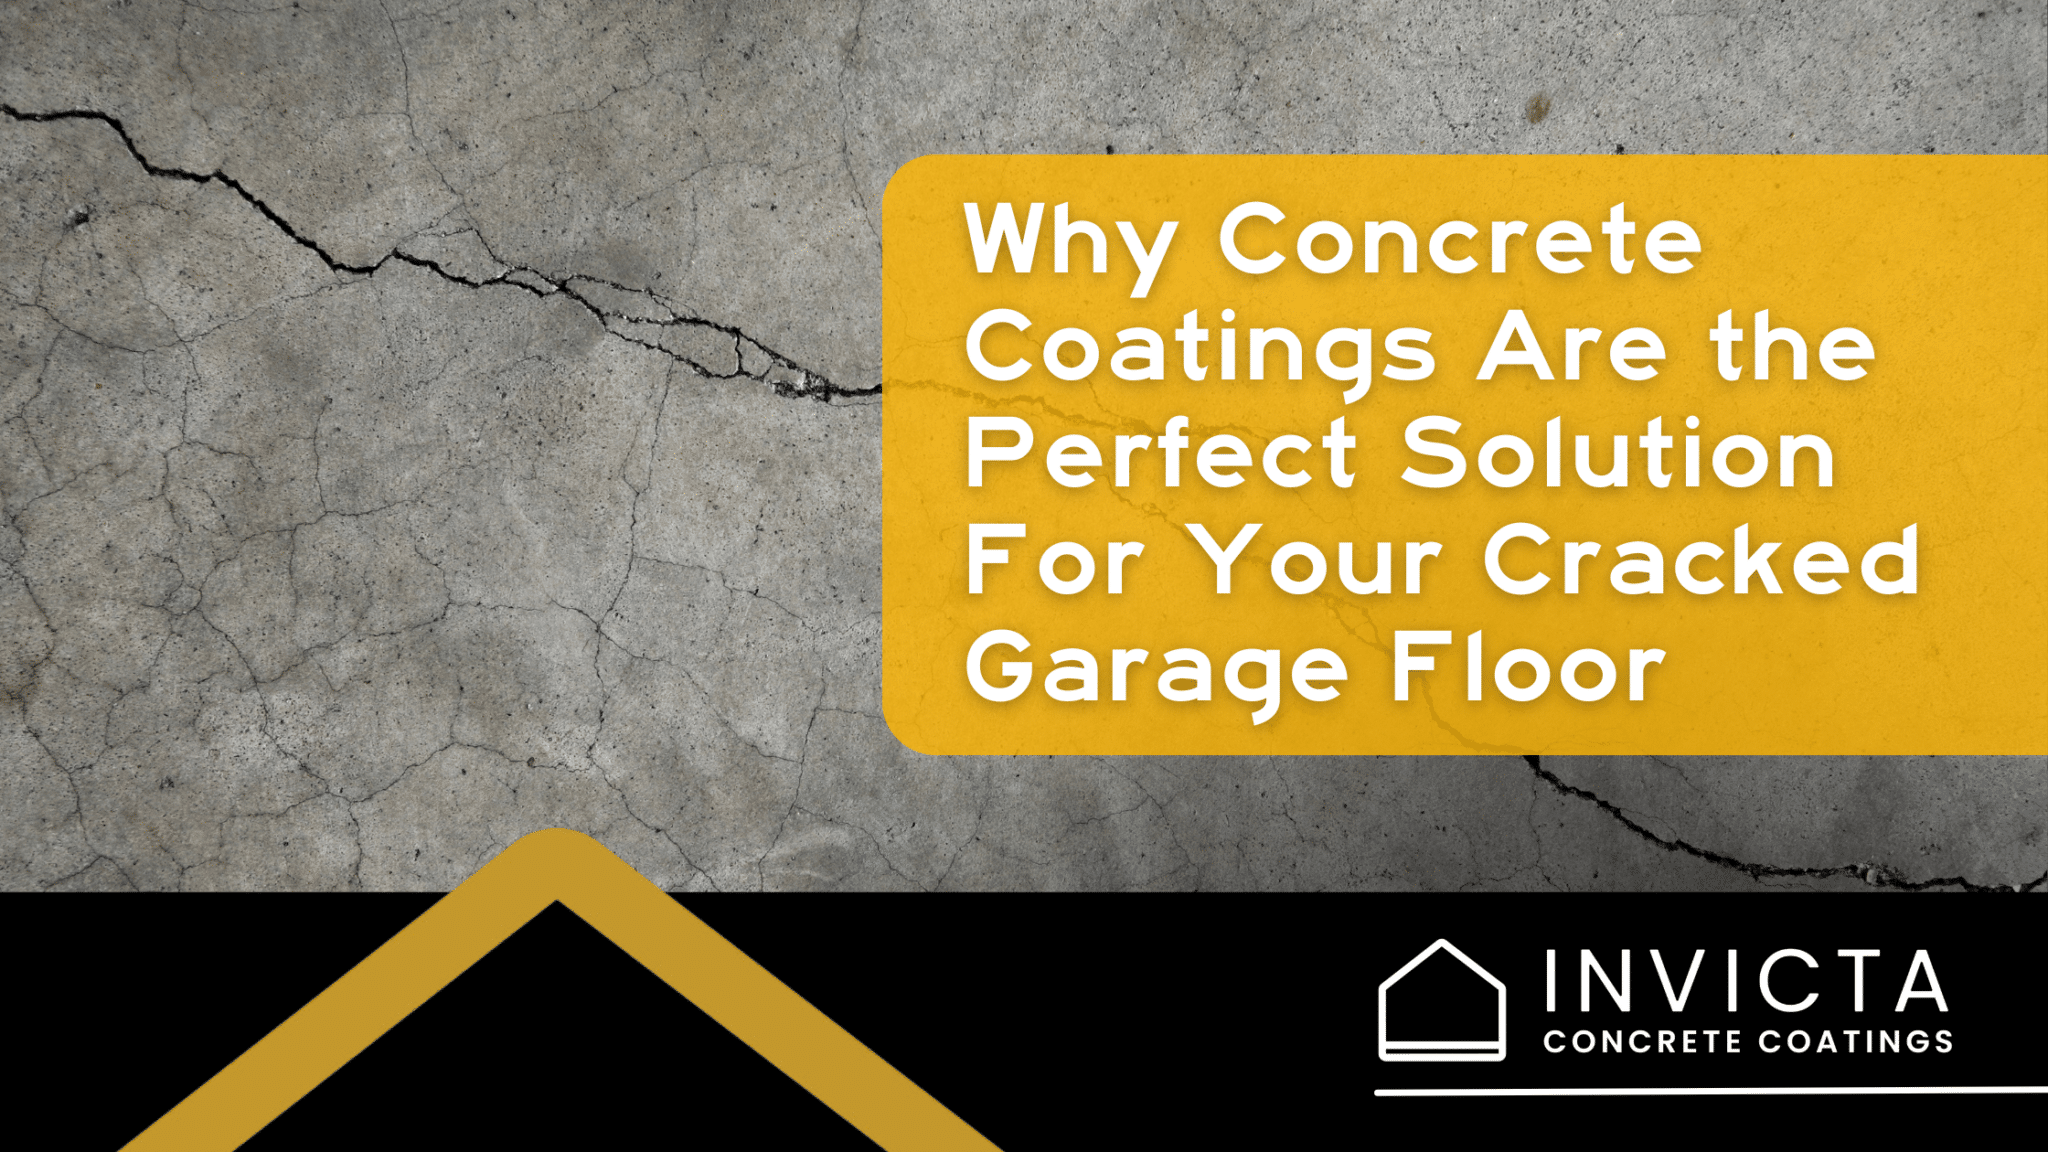 An image of a cracked garage floor with the title "Why Concrete Coatings are the Perfect Solution for Your Cracked Garage Floor" in white text in a yellow box with the Invicta logo